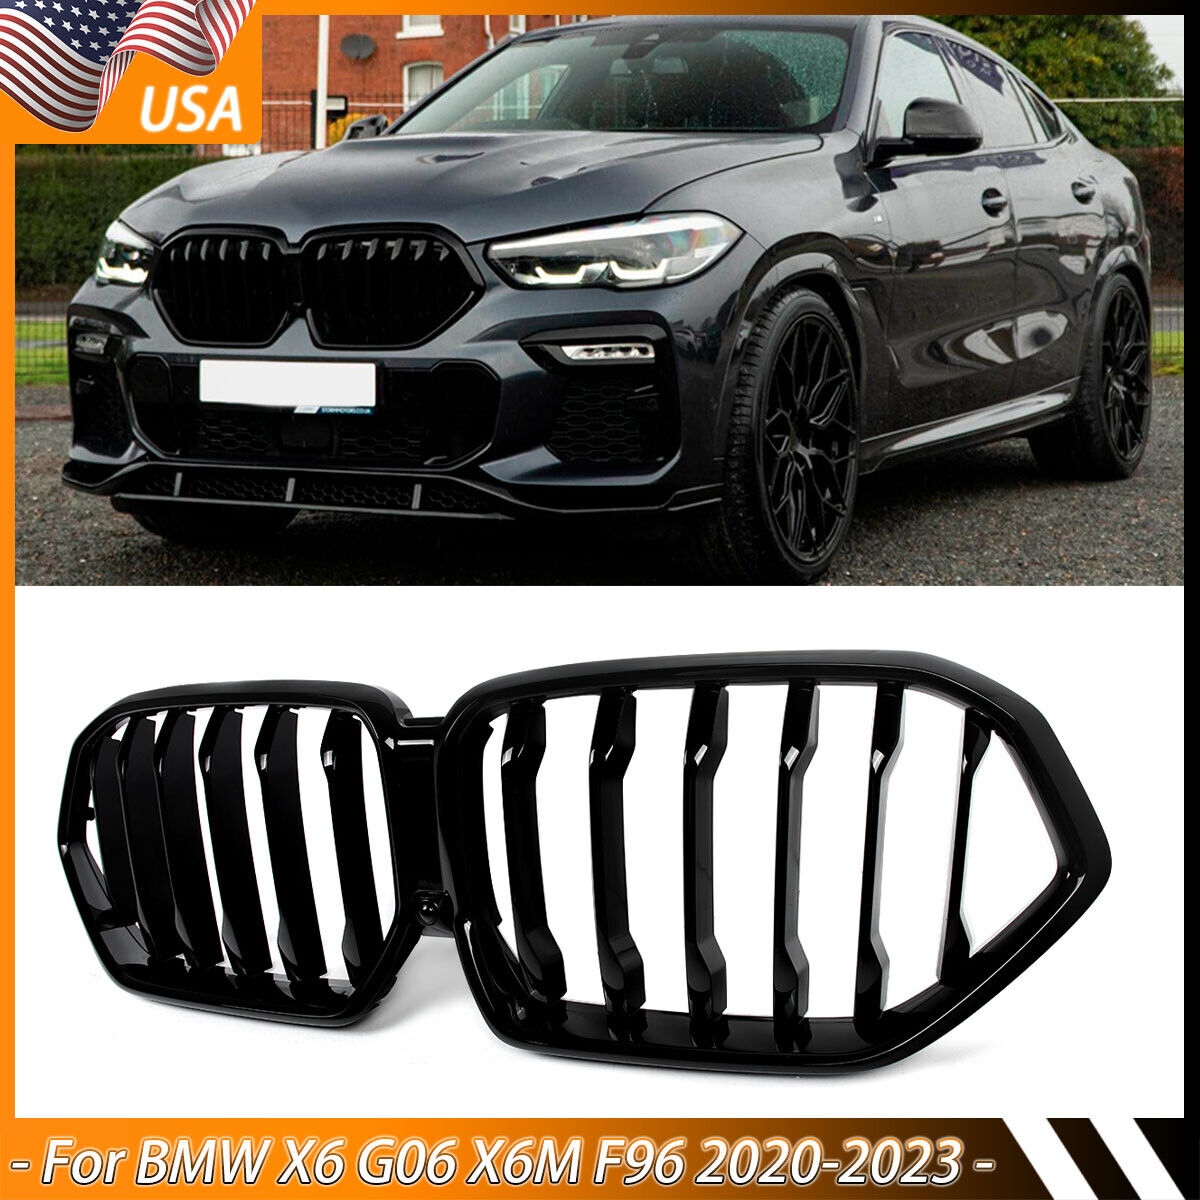 For BMW X6 G06 X6M F96 2020-2023 1-Slat Front Kidney Grill Grille Glossy Black